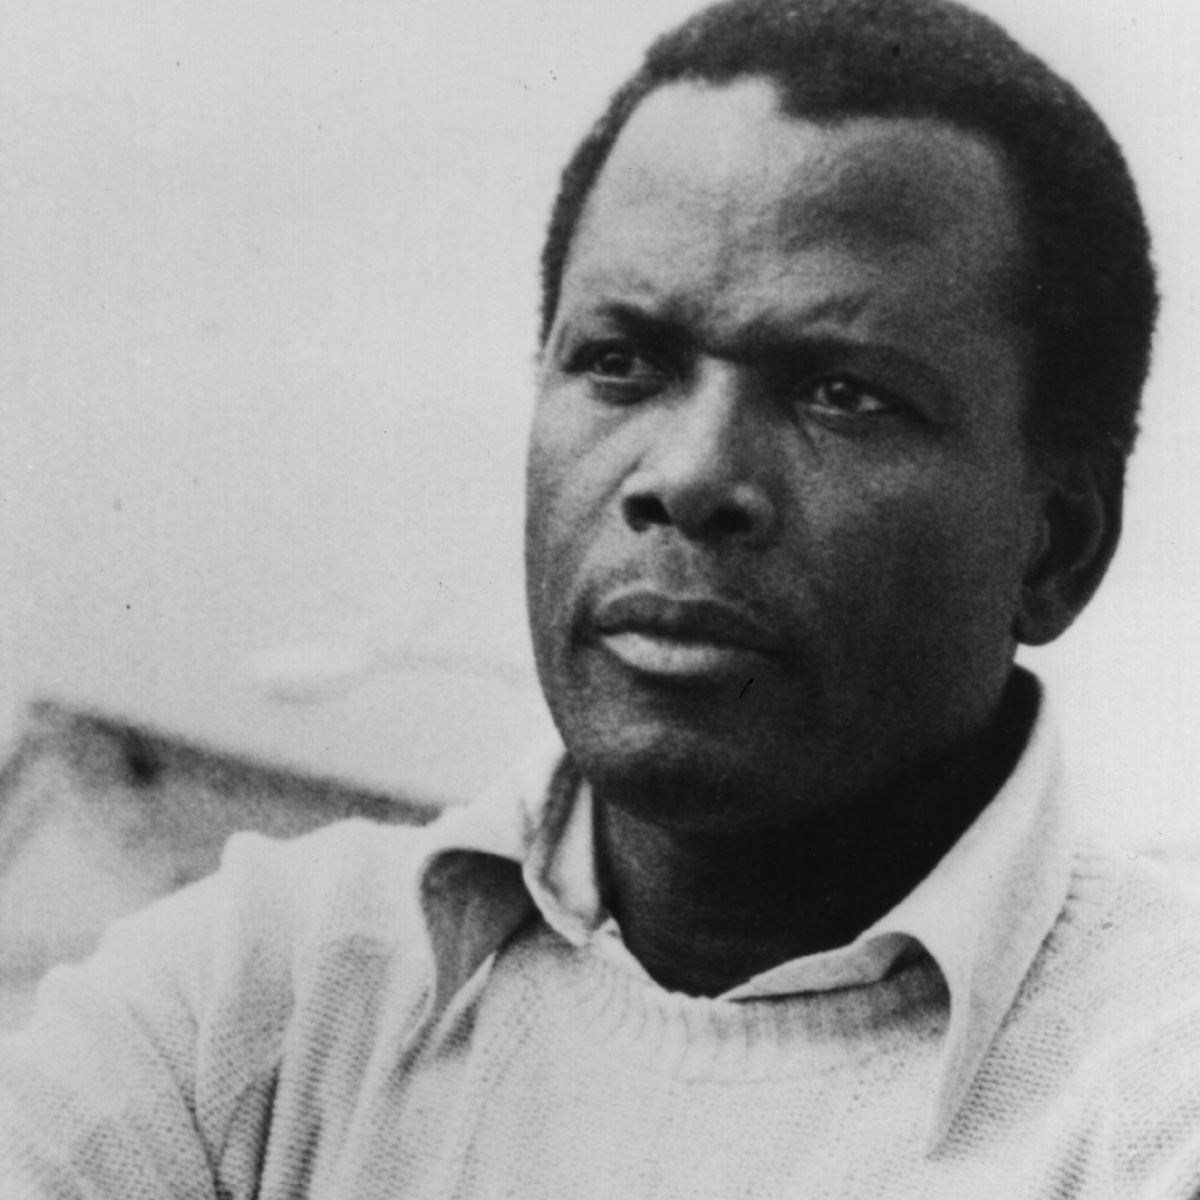 The Sidney Poitier Family Is Speaking Out About The Loss Of The Legendary Actor